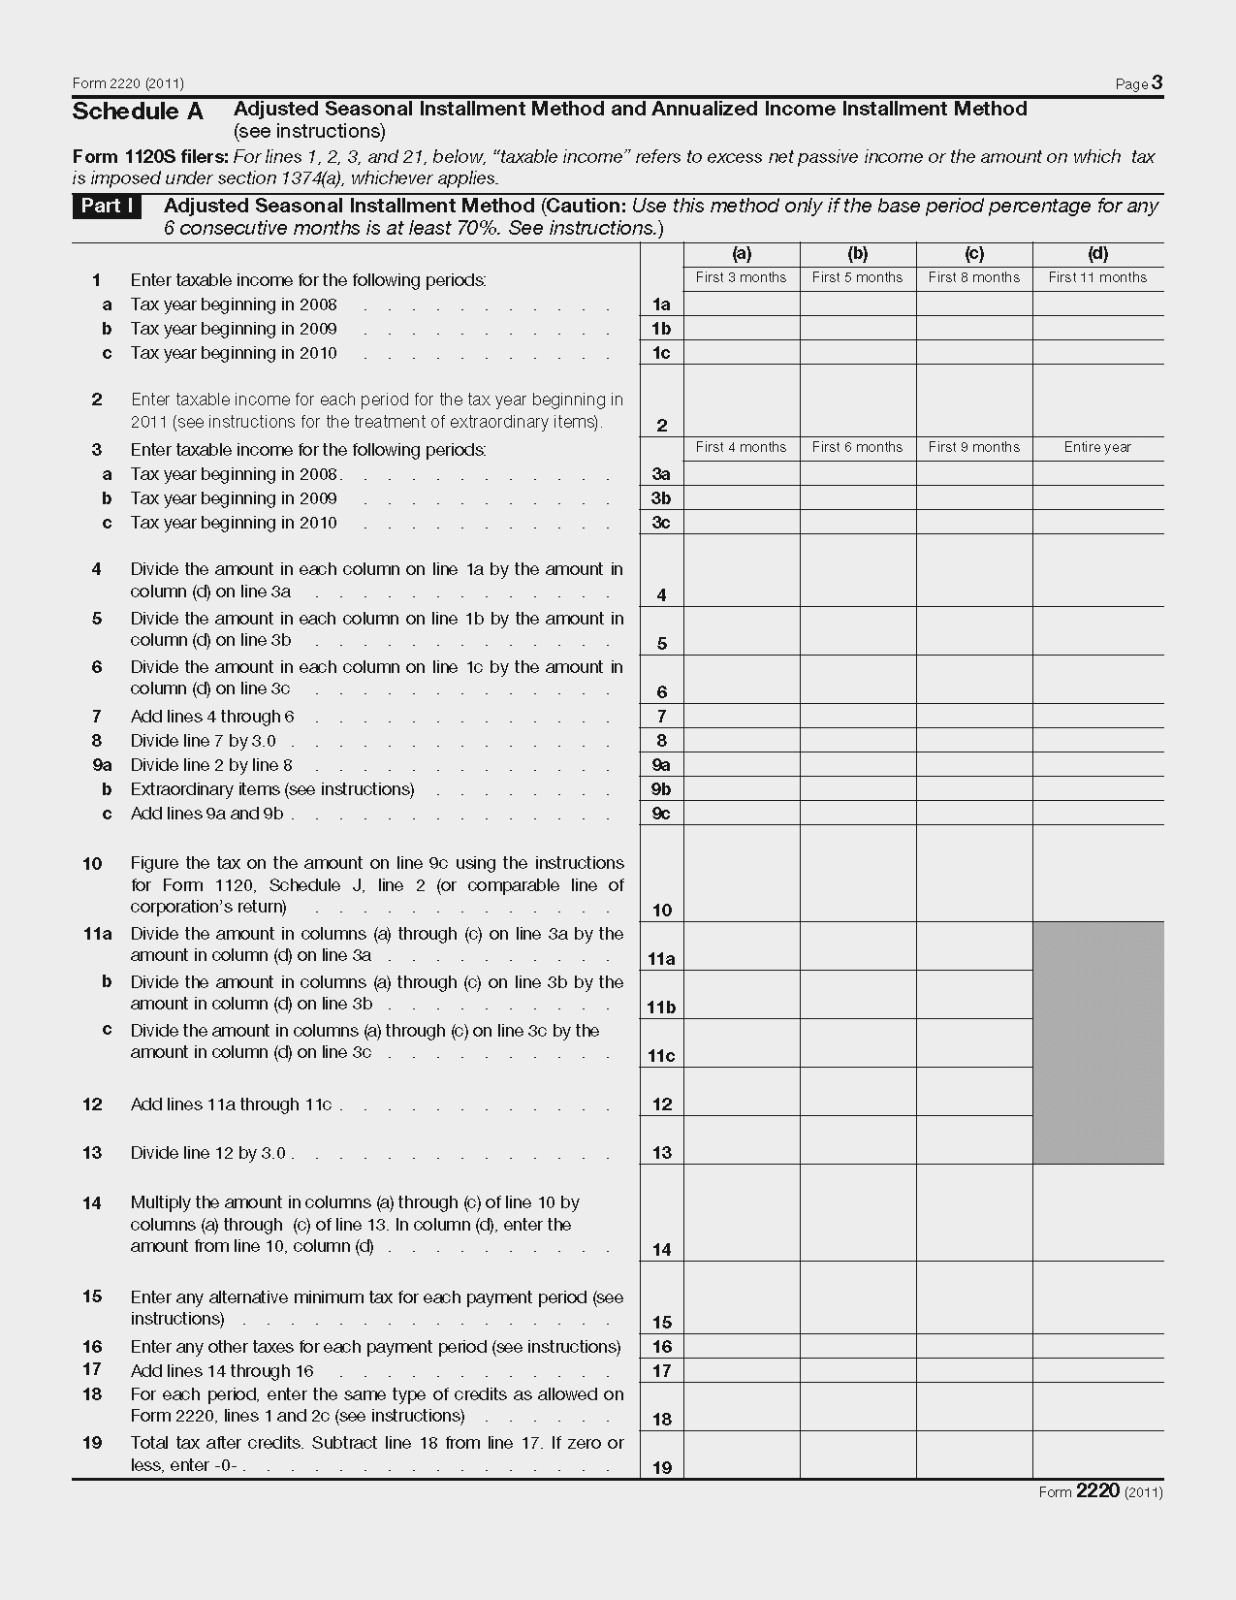 2017 Estimated Tax Worksheet  Briefencounters Regarding 2017 Estimated Tax Worksheet